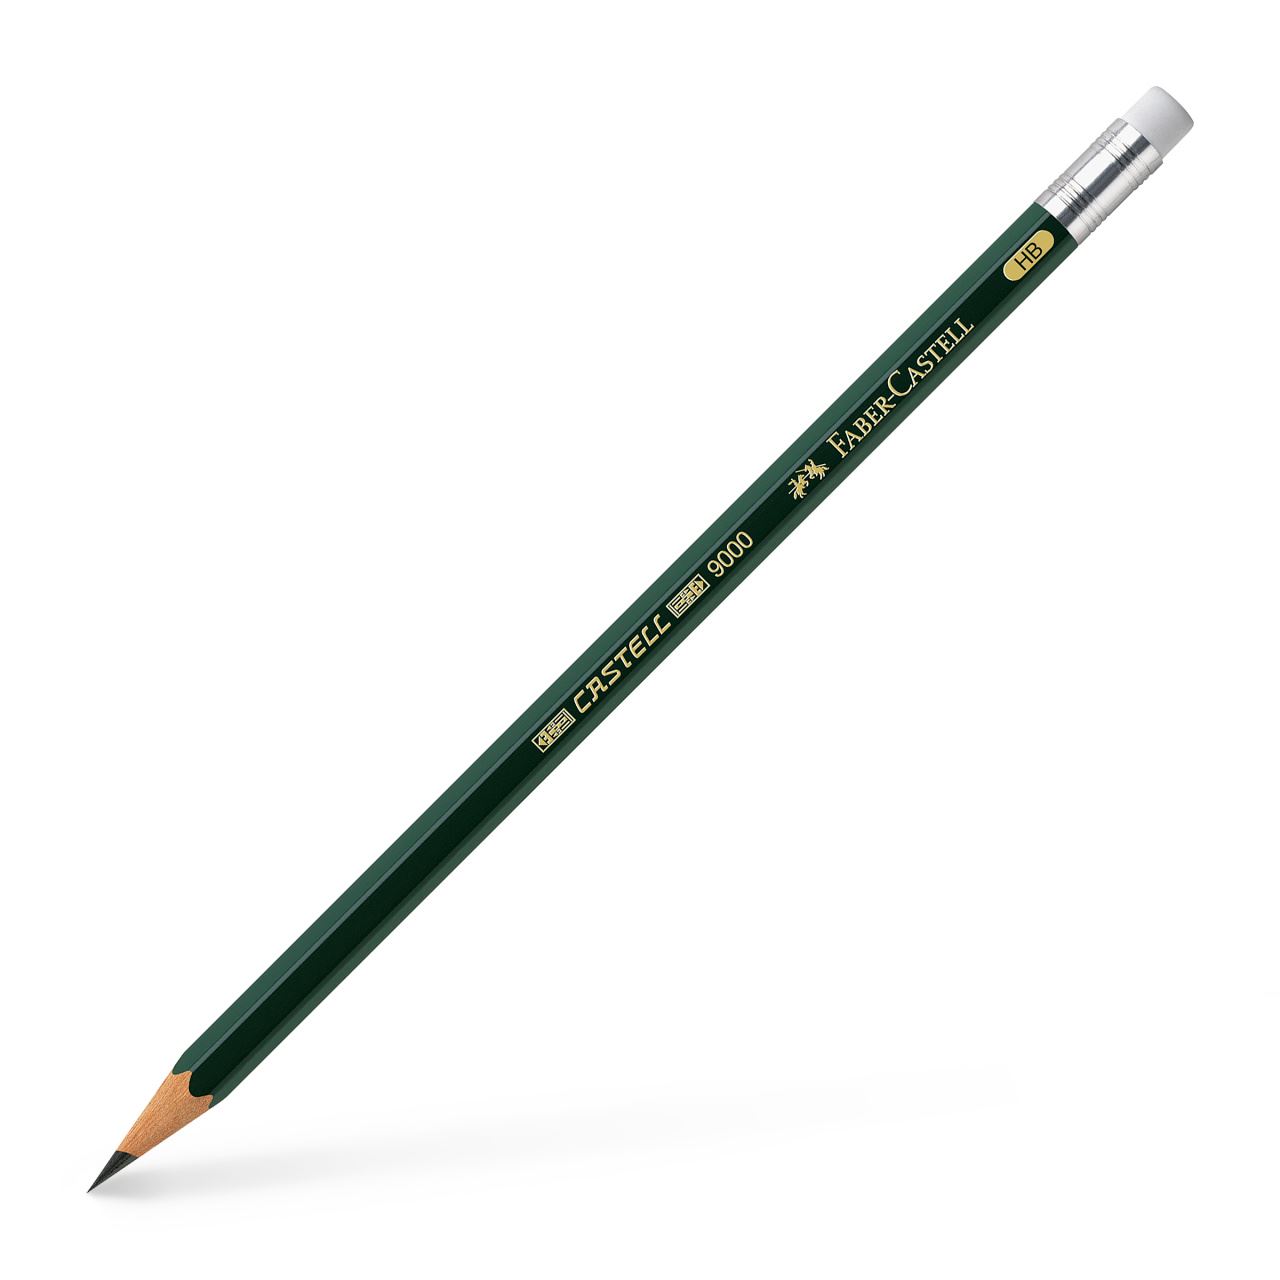 Faber-Castell - Castell 9000 graphite pencil with eraser, HB